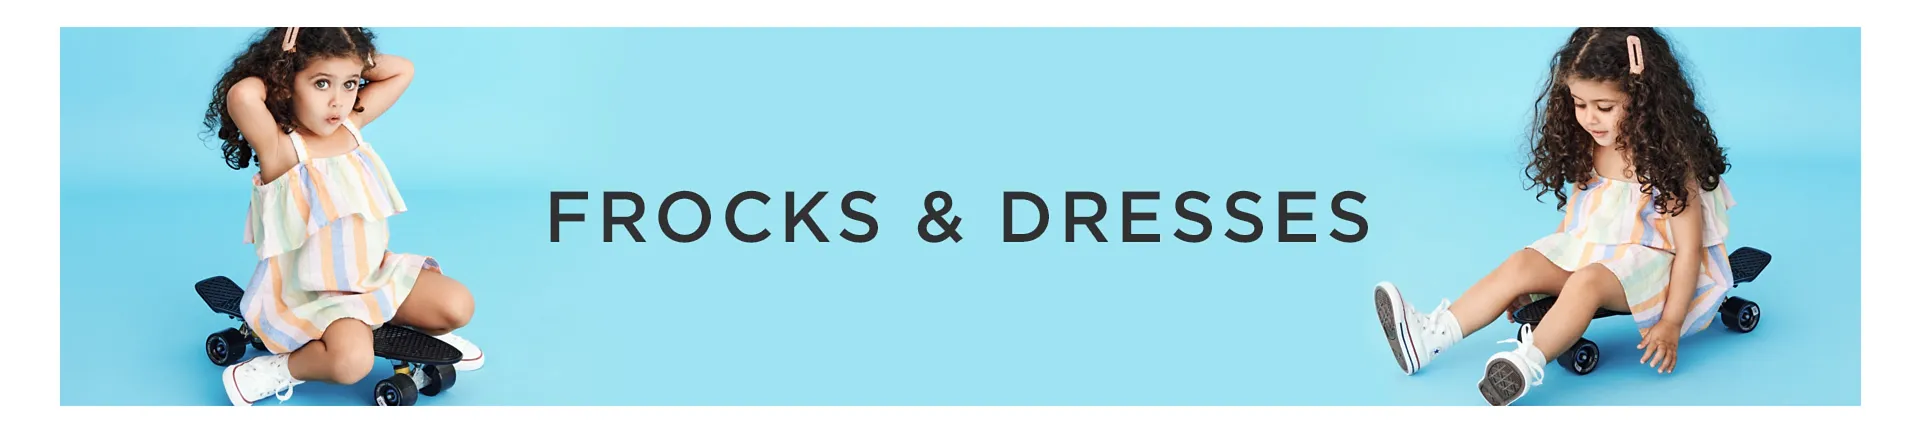 Frocks and Dresses